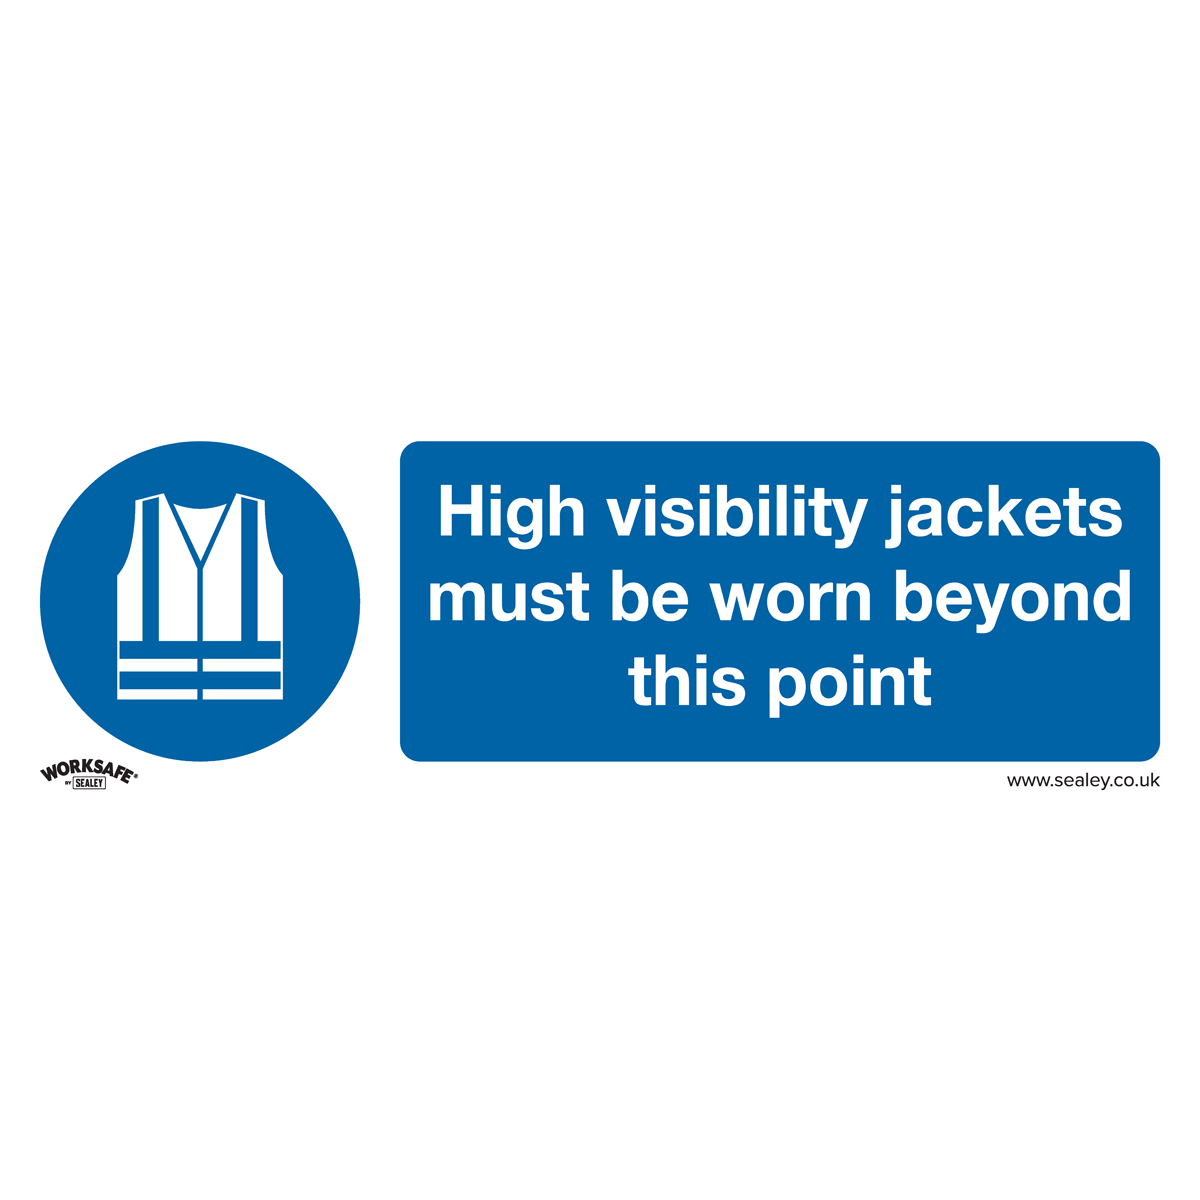 Sealey Mandatory Safety Sign - High Visibility Jackets Must Be Worn Beyond This Point - Self-Adhesive Vinyl - Pack of 10